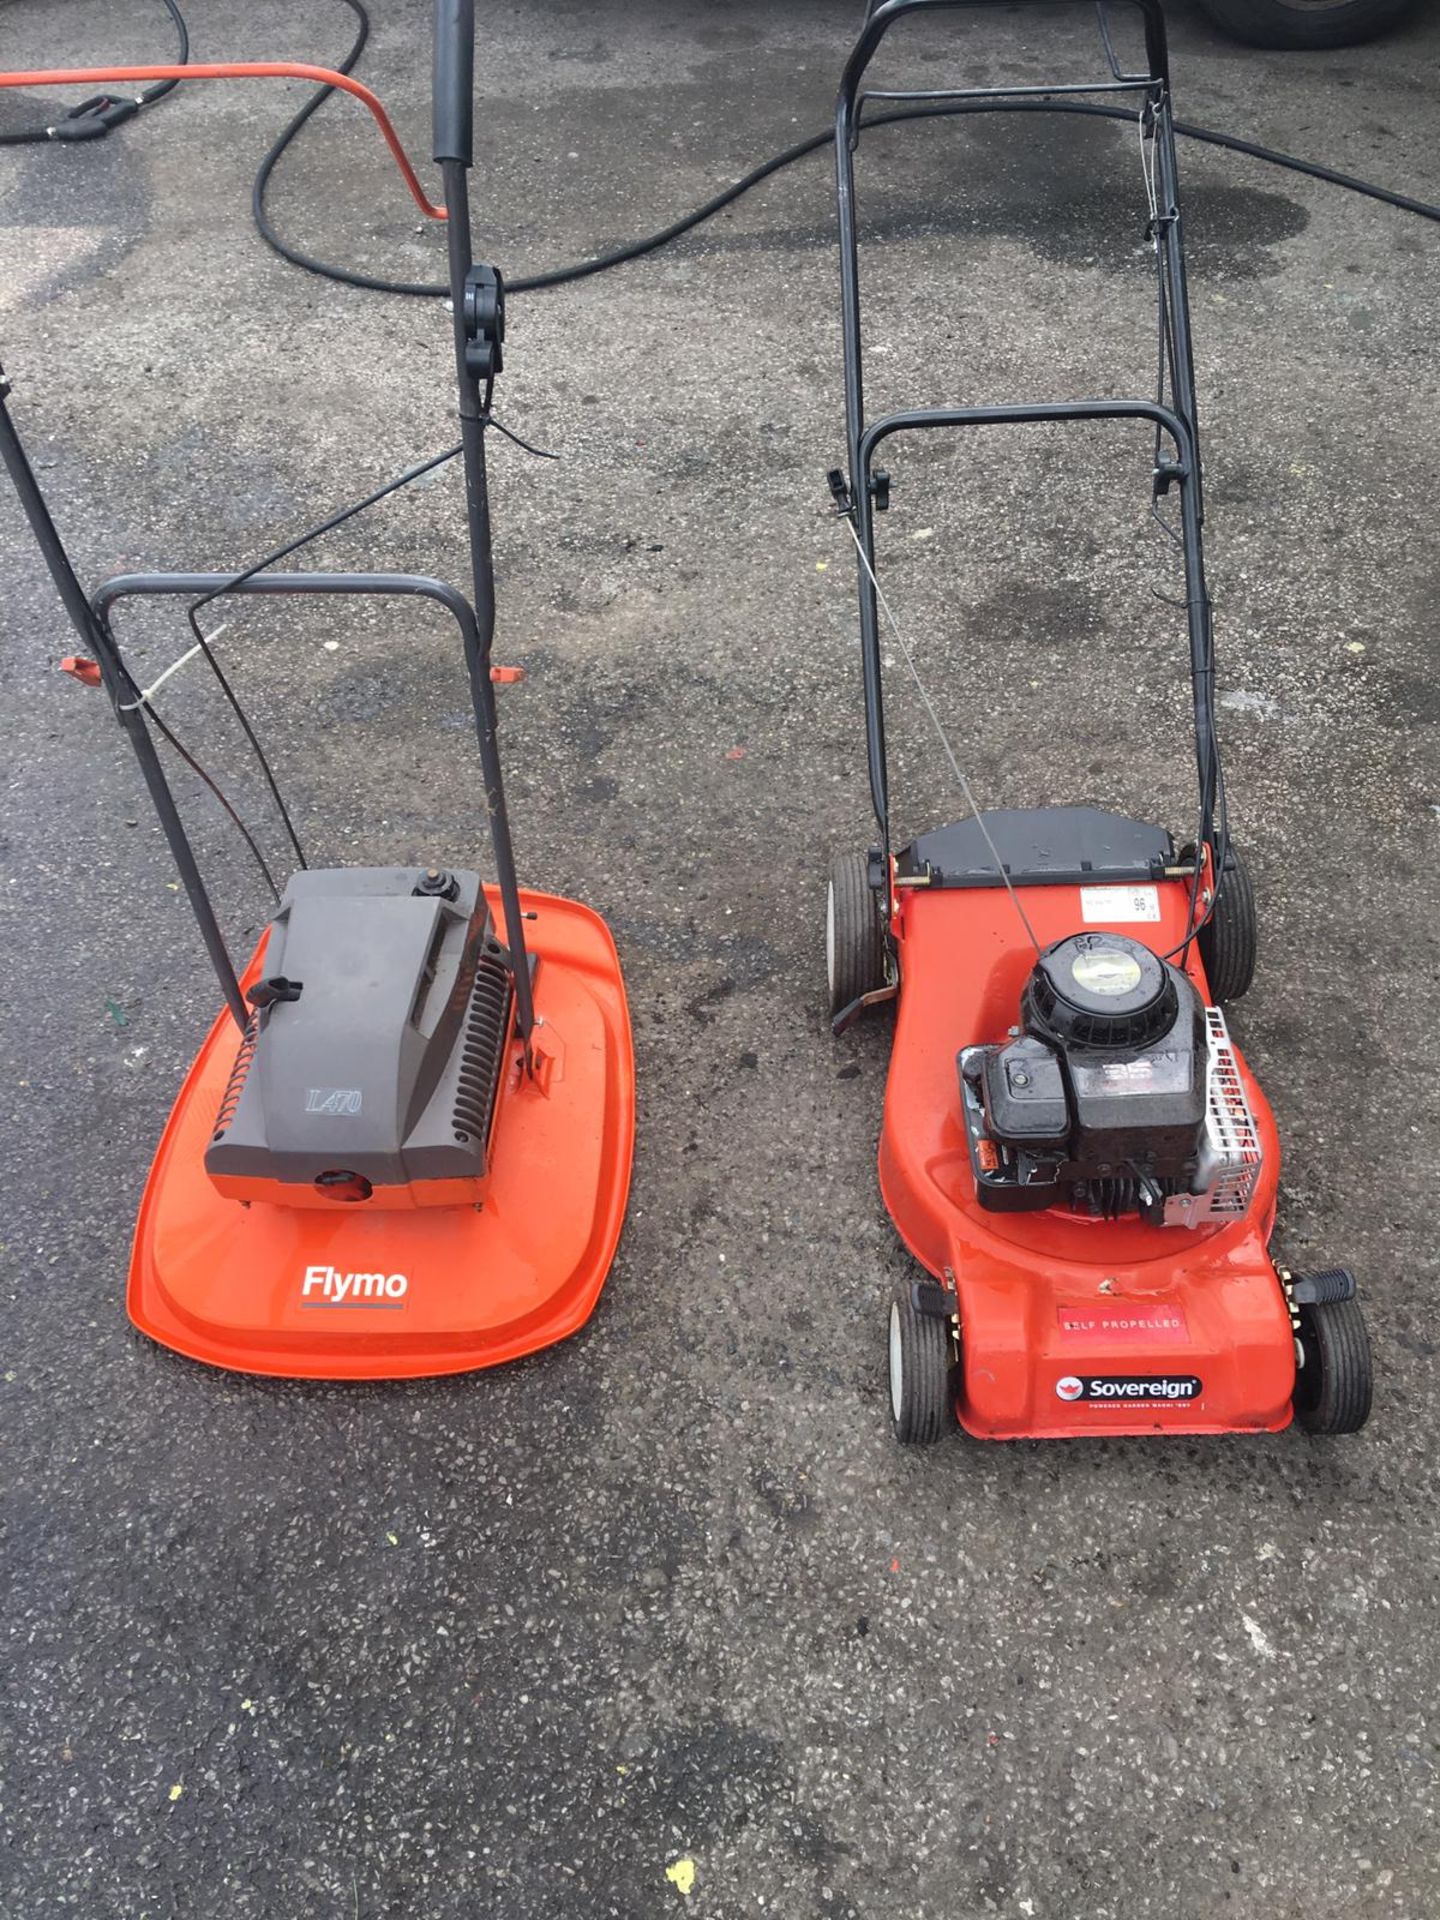 4 X WALK BEHIND PUSH MOWERS ALL SOLD AS ONE LOT - NO RESERVE! *NO VAT* - Image 10 of 16